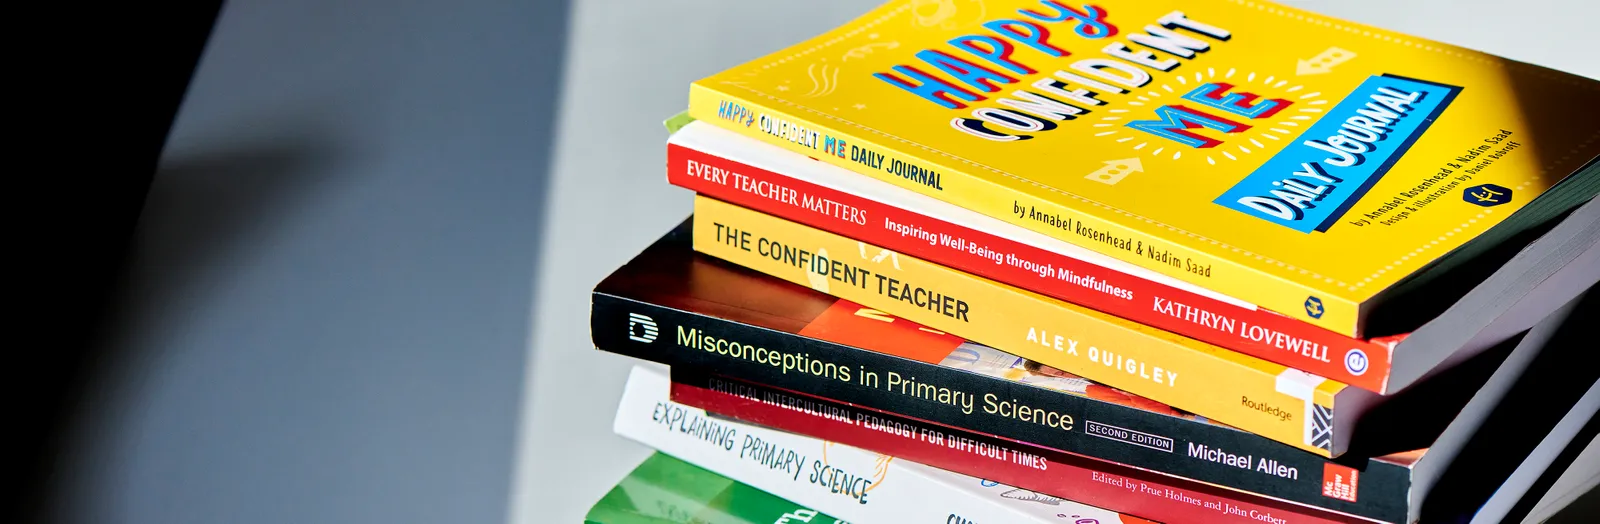 Stack of books on education